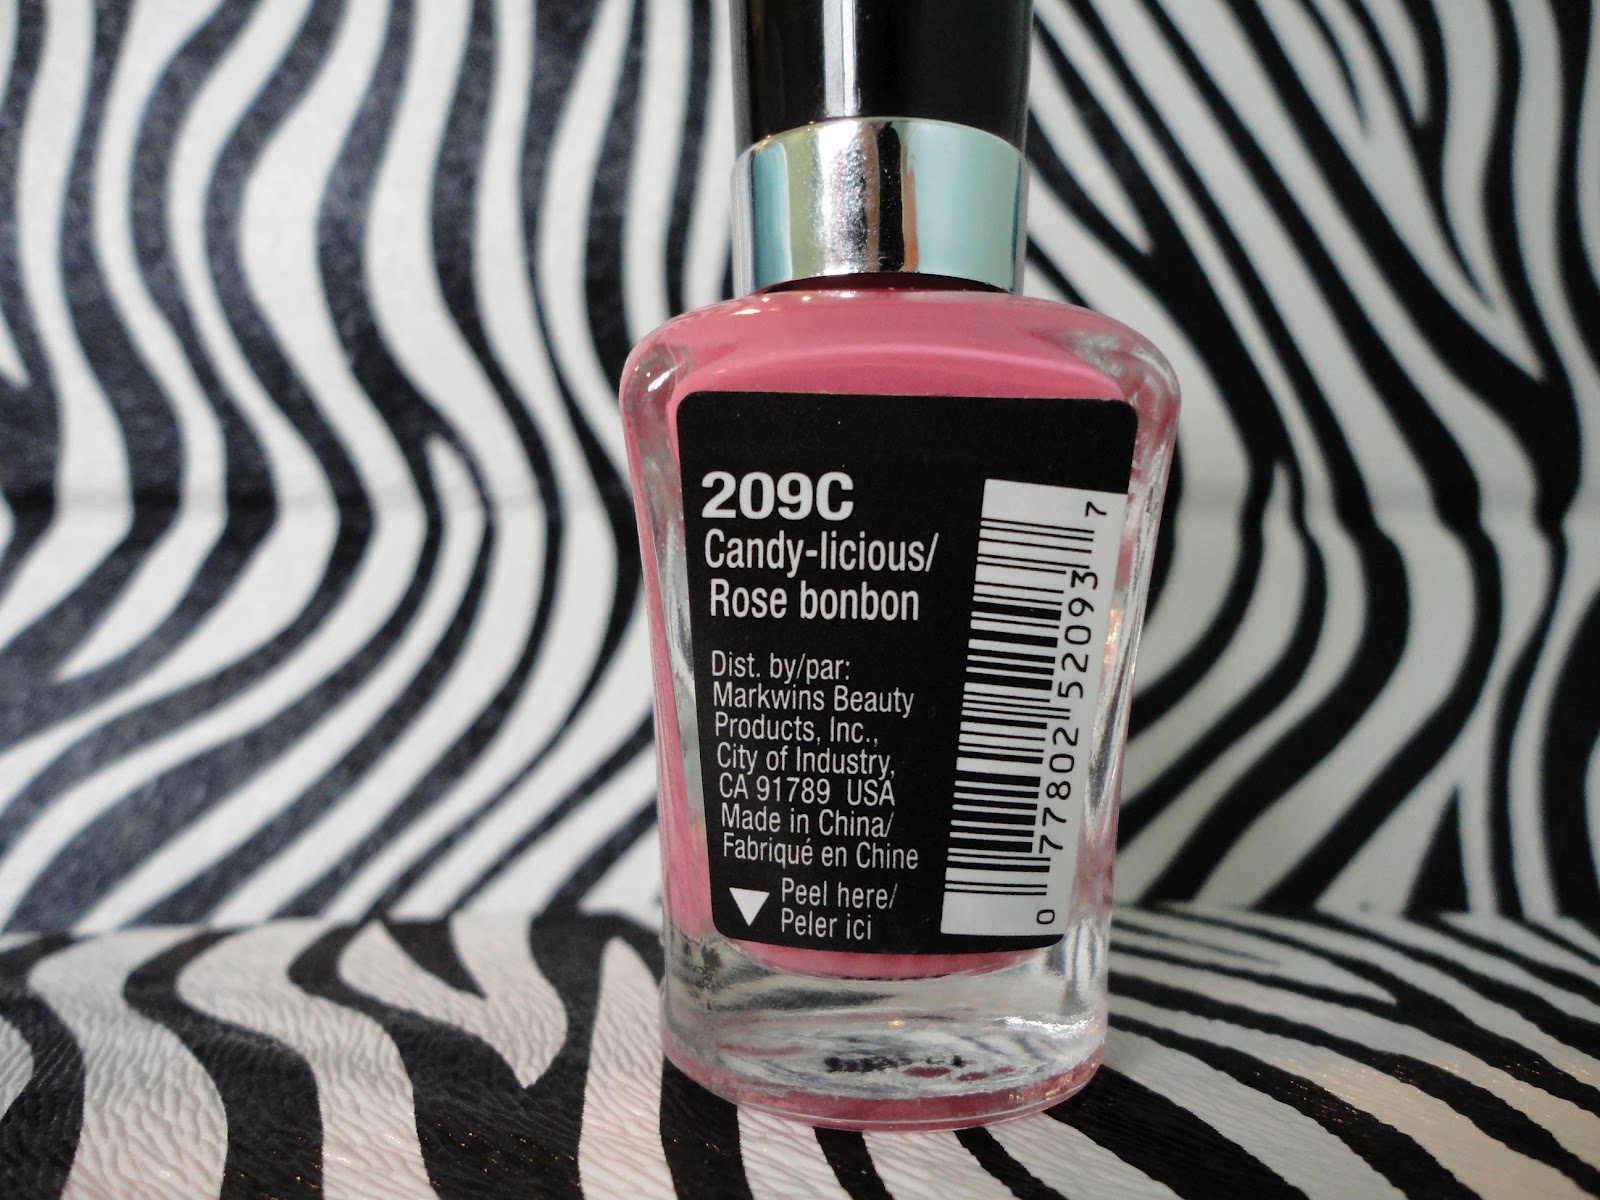 8. Wet n Wild Megalast Nail Color in "Candy-licious" - wide 7